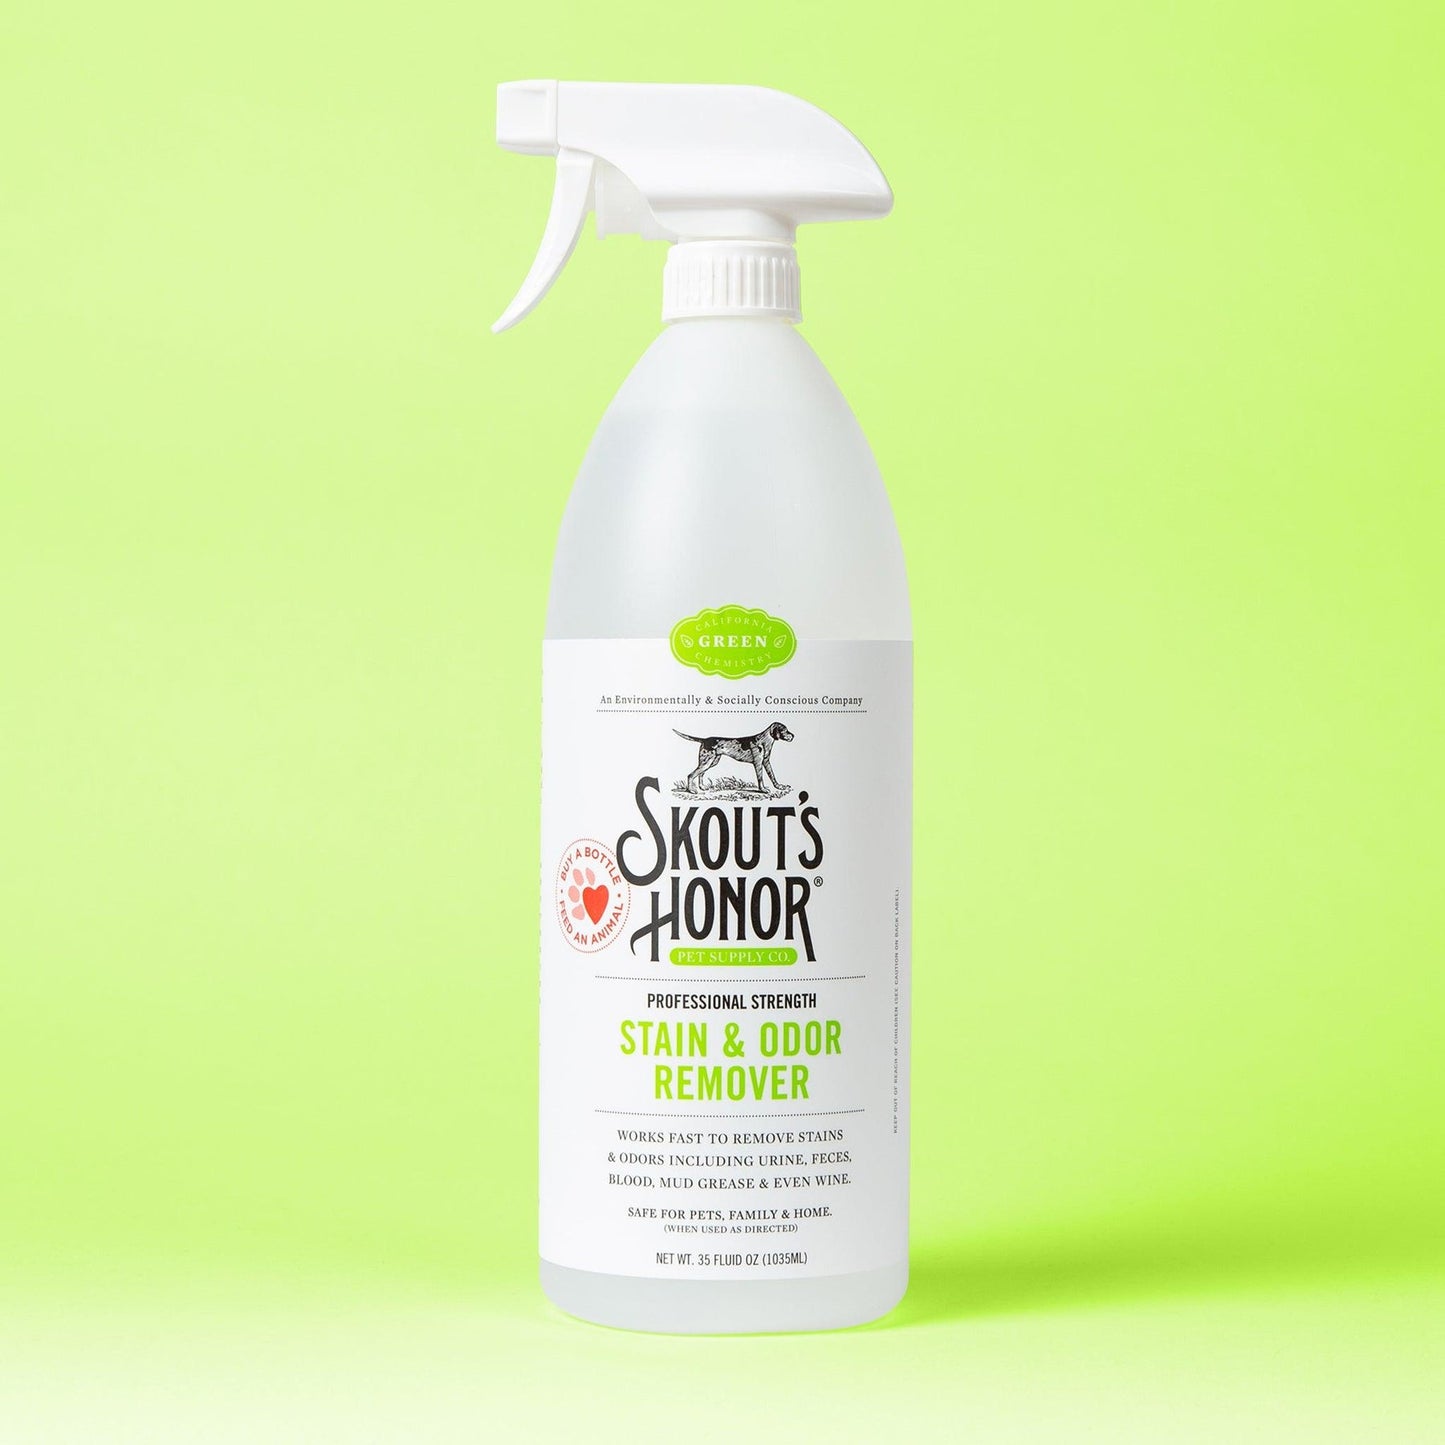 Skout's Honor PET STAIN & ODOR REMOVER